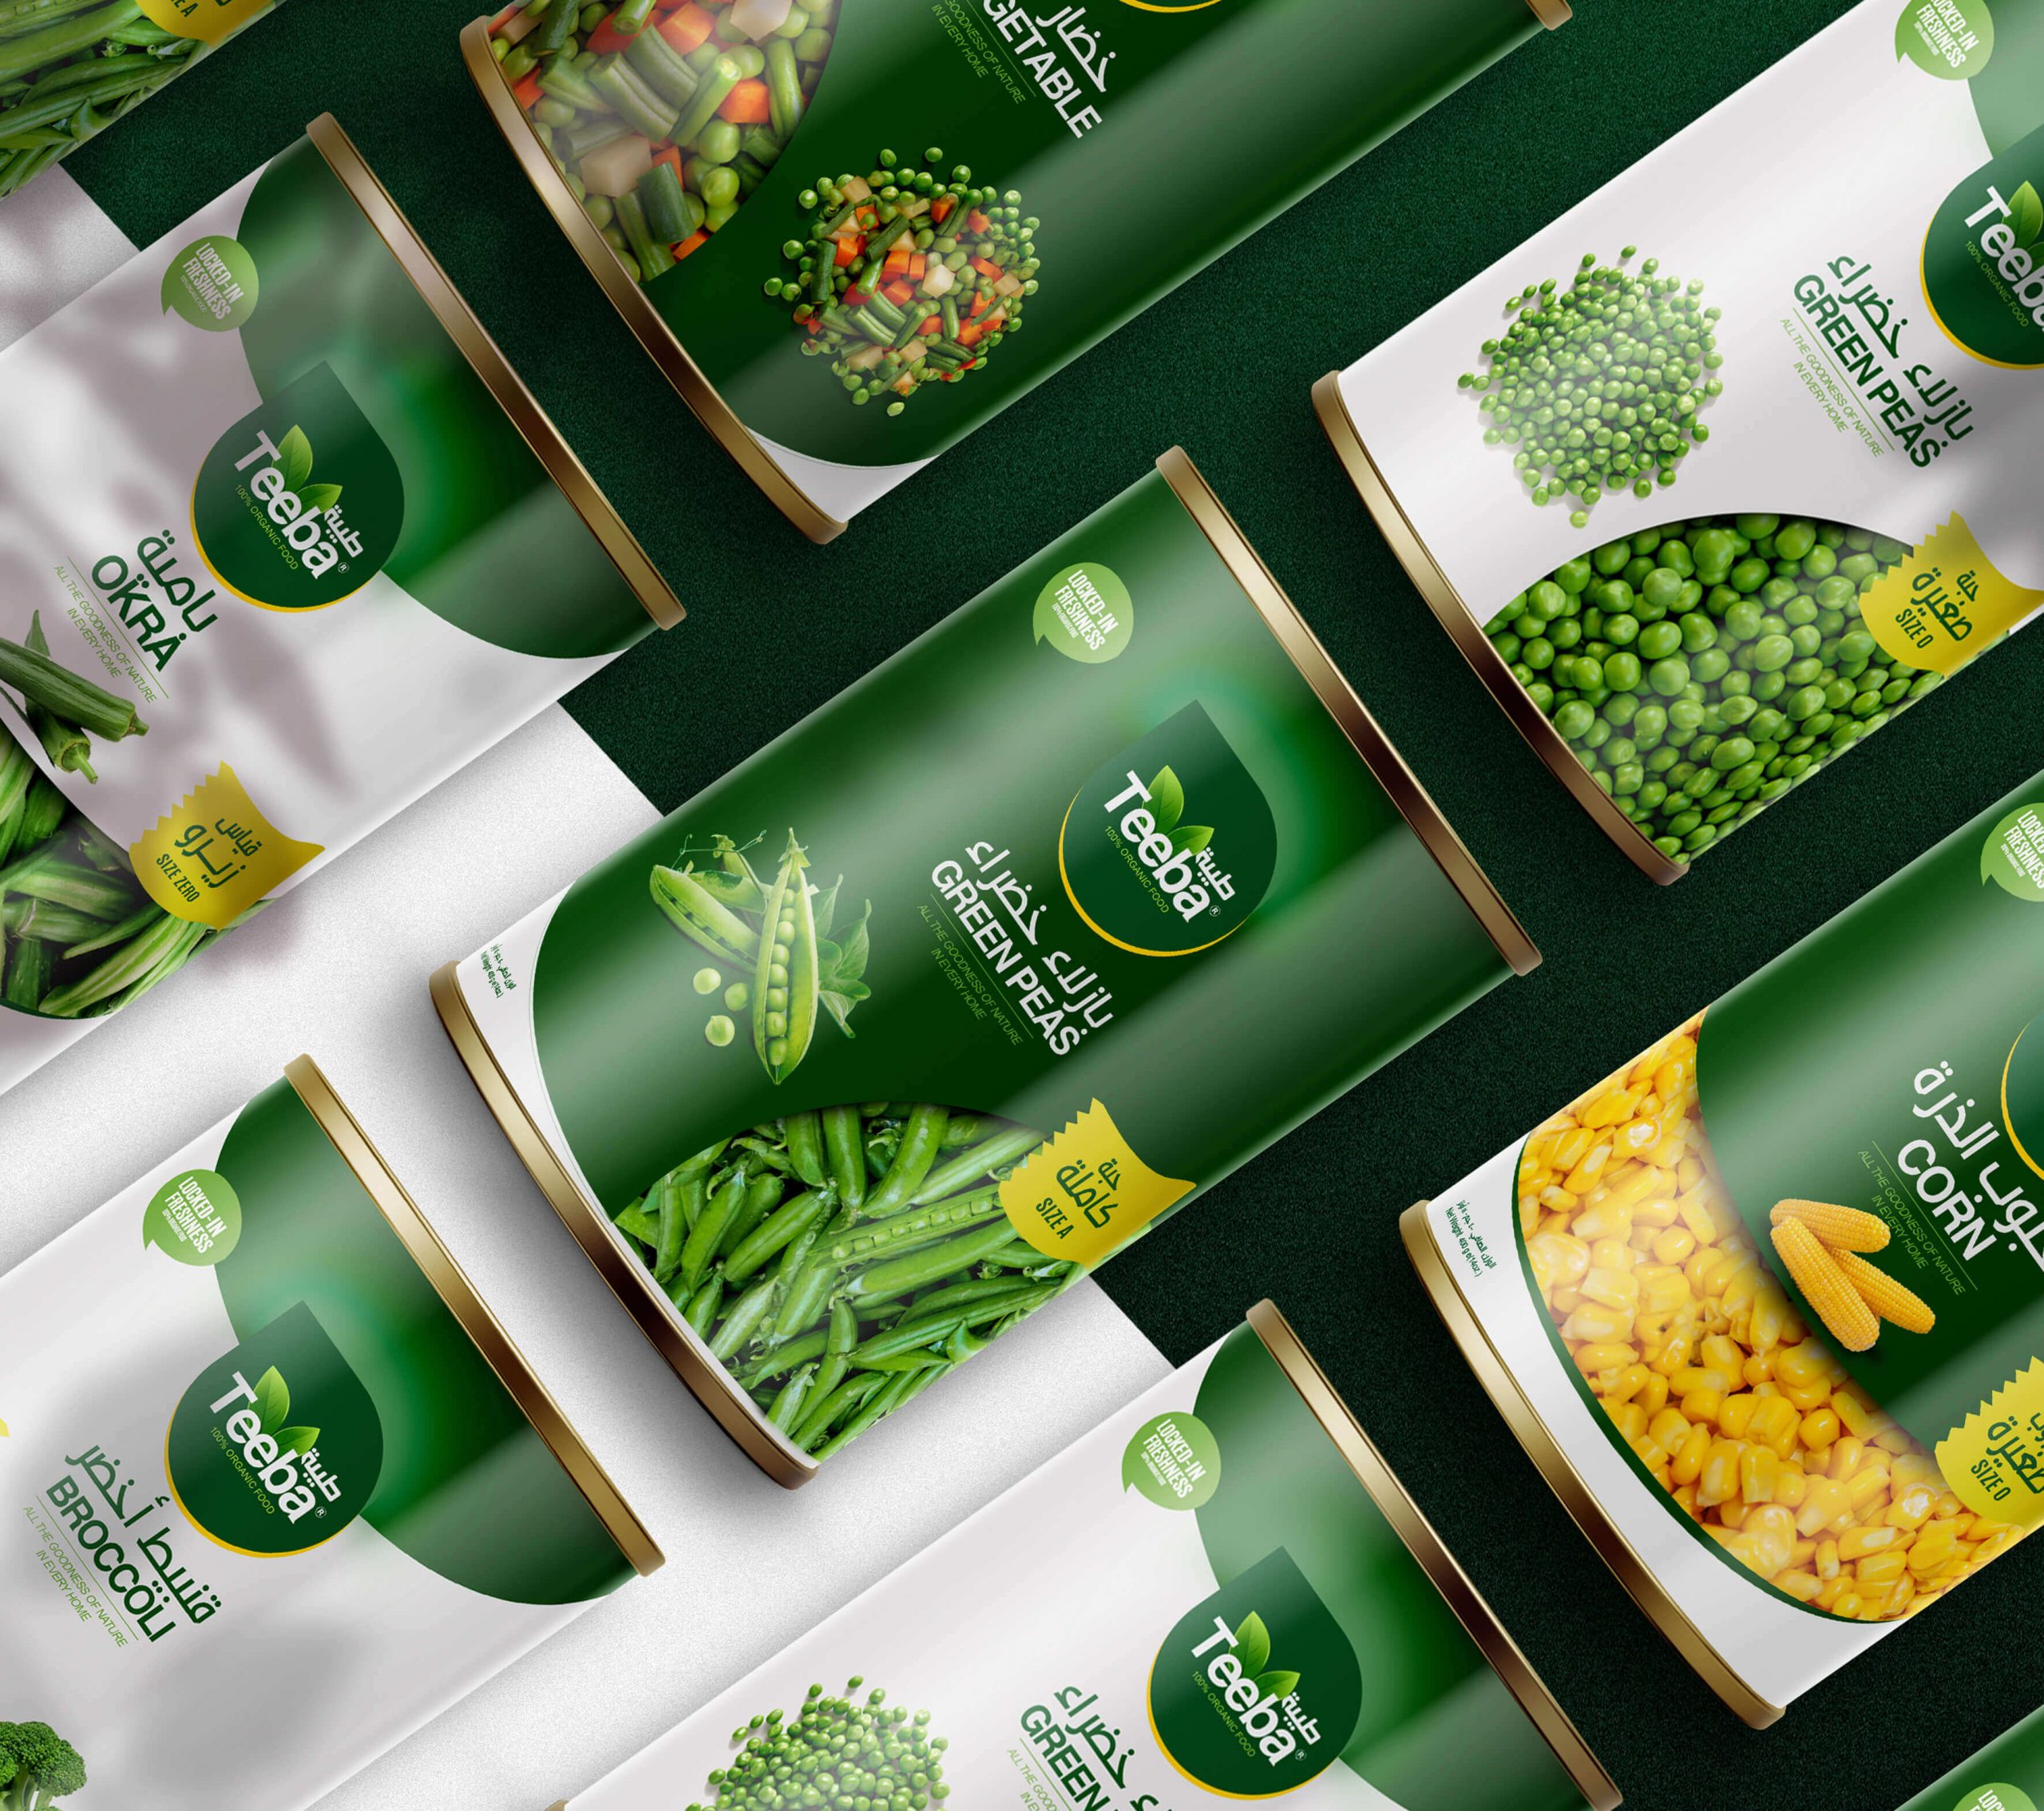 Teeba frozen food products are a fantastic option for anyone looking for high-quality, delicious frozen food. As the designer of their packaging, I can attest to the fact that they have a wide variety of products, from plastic bags to tin options, all of which are beautifully presented. The packaging design features a stunning combination of dark green and white, which provides a fresh and modern look to the products. Teeba frozen food products are manufactured by an Egyptian company but based in Ireland. With their extensive range of frozen food products, Teba is sure to have something to suit every taste and preference.<br />
Designing frozen food packaging that stands out from the competition can be a daunting task, but it was one that I relished. I had to consider various factors such as the brand's values, target audience, and market trends while coming up with a design that would make Teeba's frozen food products more appealing to customers. The challenge was to create a design that not only looked great but also conveyed the quality and freshness of the products. However, with careful consideration of every detail, I was able to design packaging that truly stands out on store shelves and helps Teeba's frozen food products to stand out from the crowd.<br />
